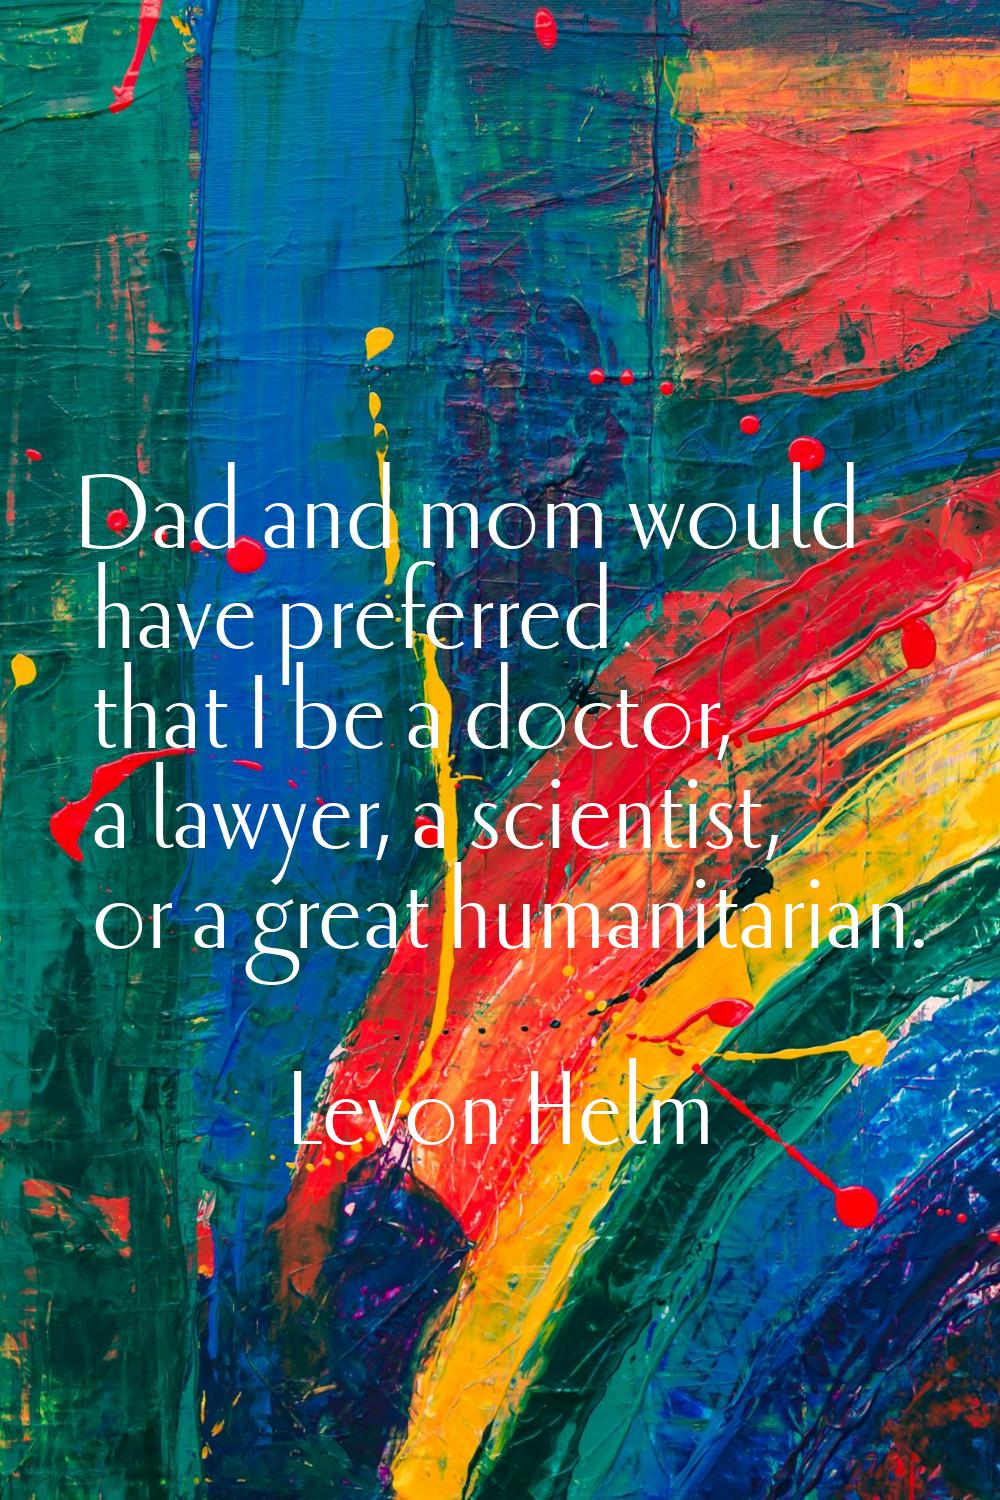 Dad and mom would have preferred that I be a doctor, a lawyer, a scientist, or a great humanitarian